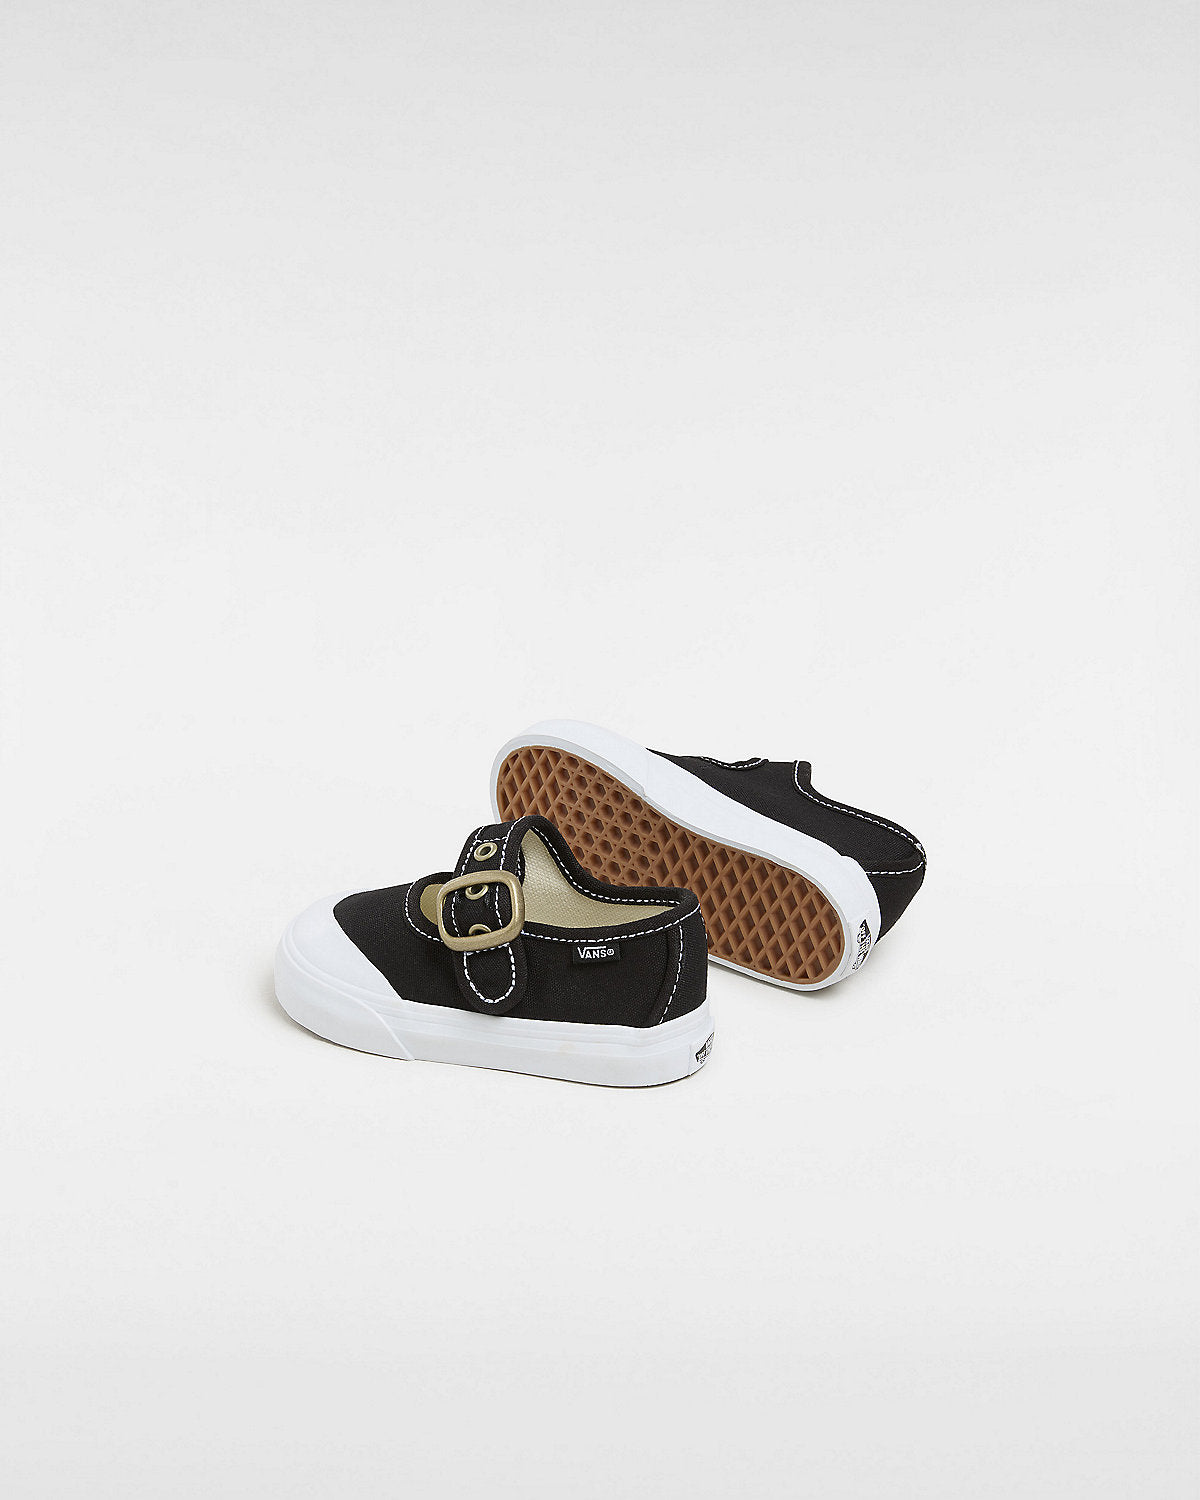 VANS Toddler Mary Jane Trainers - Black